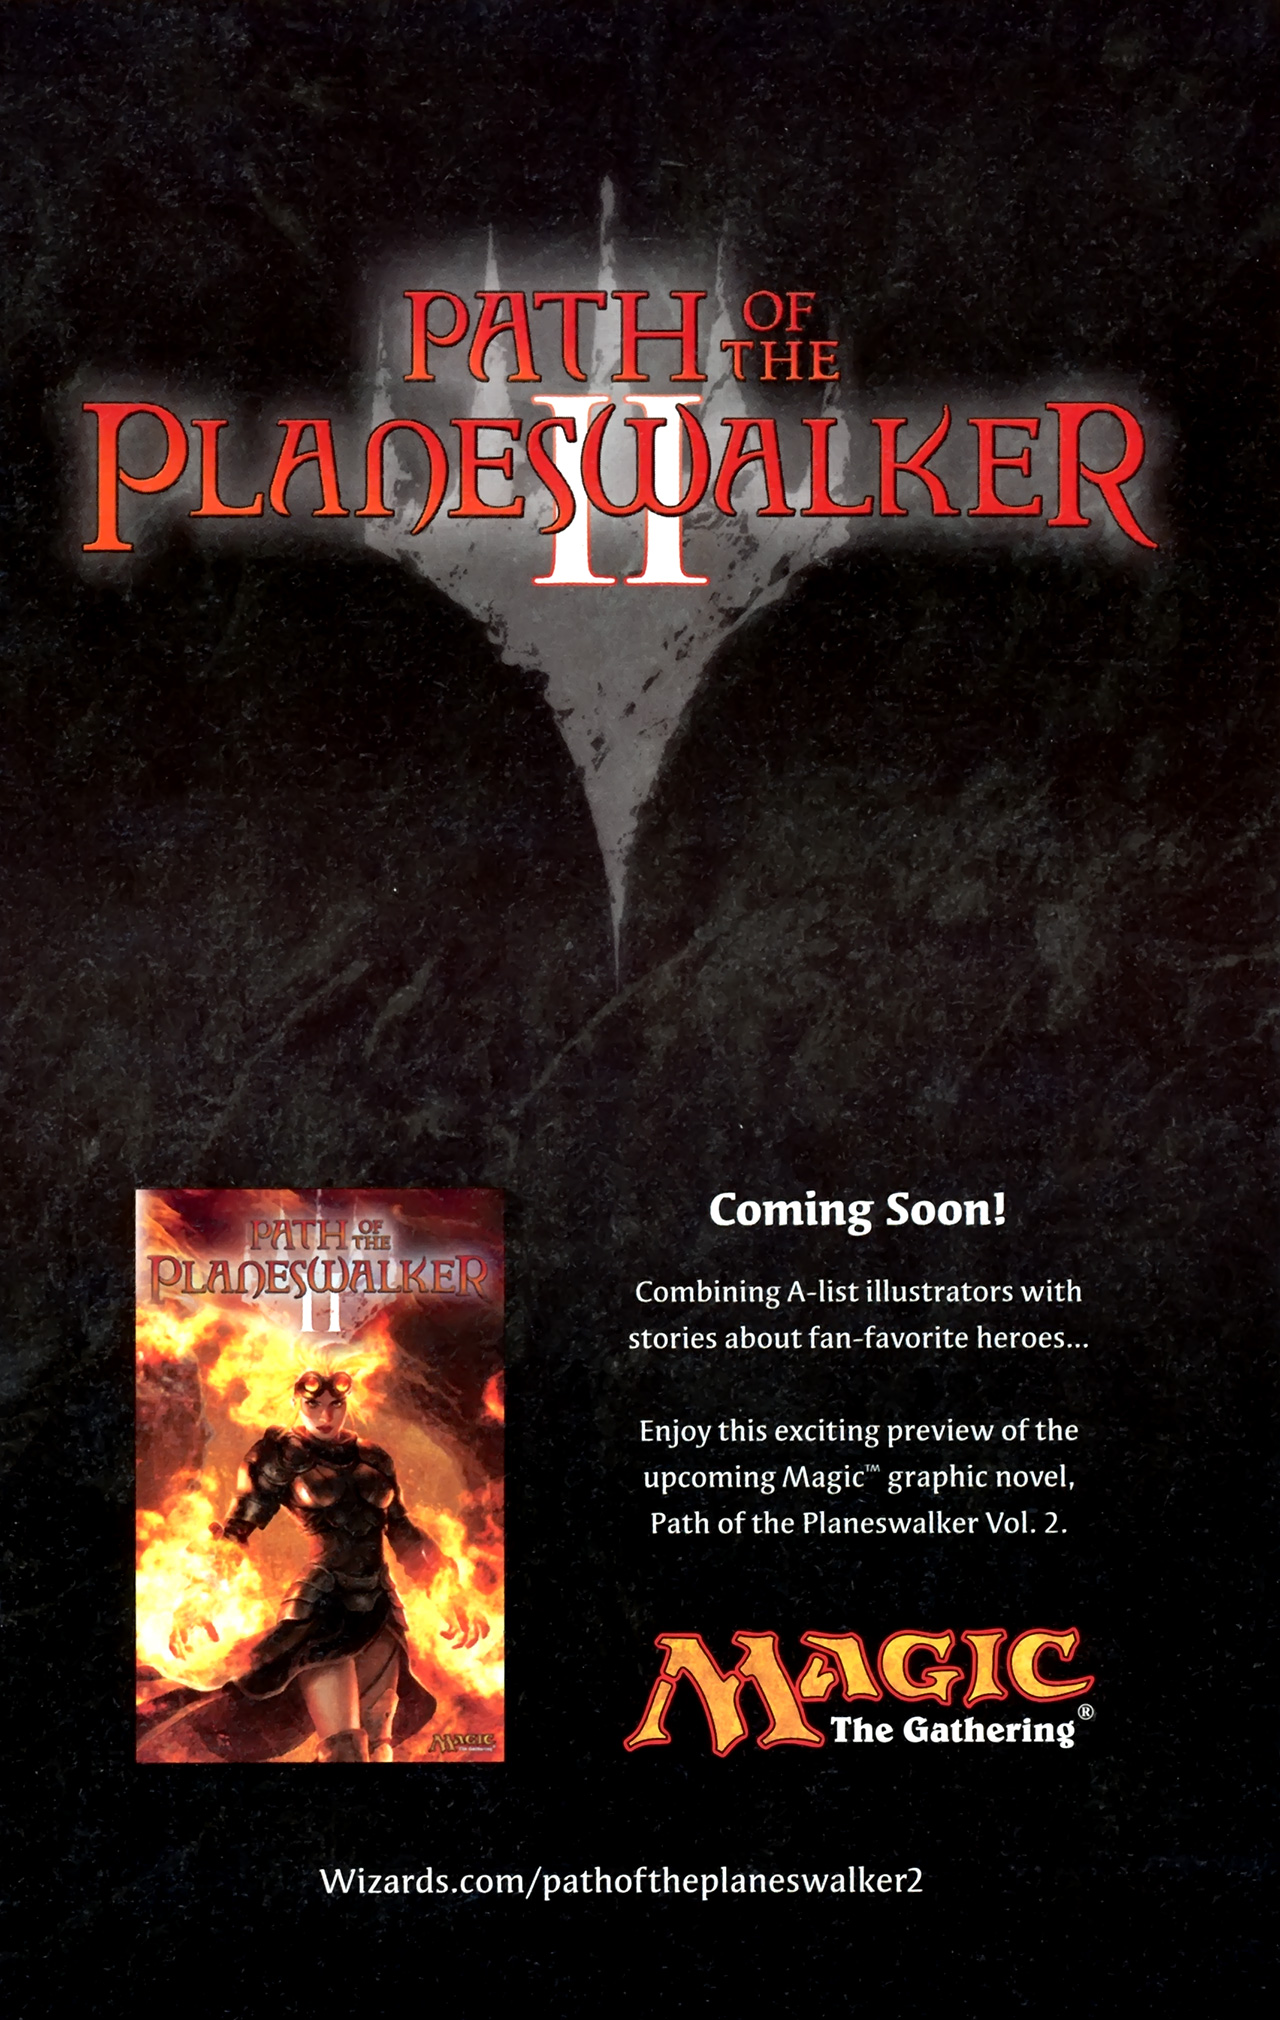 Read online Path of the Planeswalker comic -  Issue # TPB 2 - 3